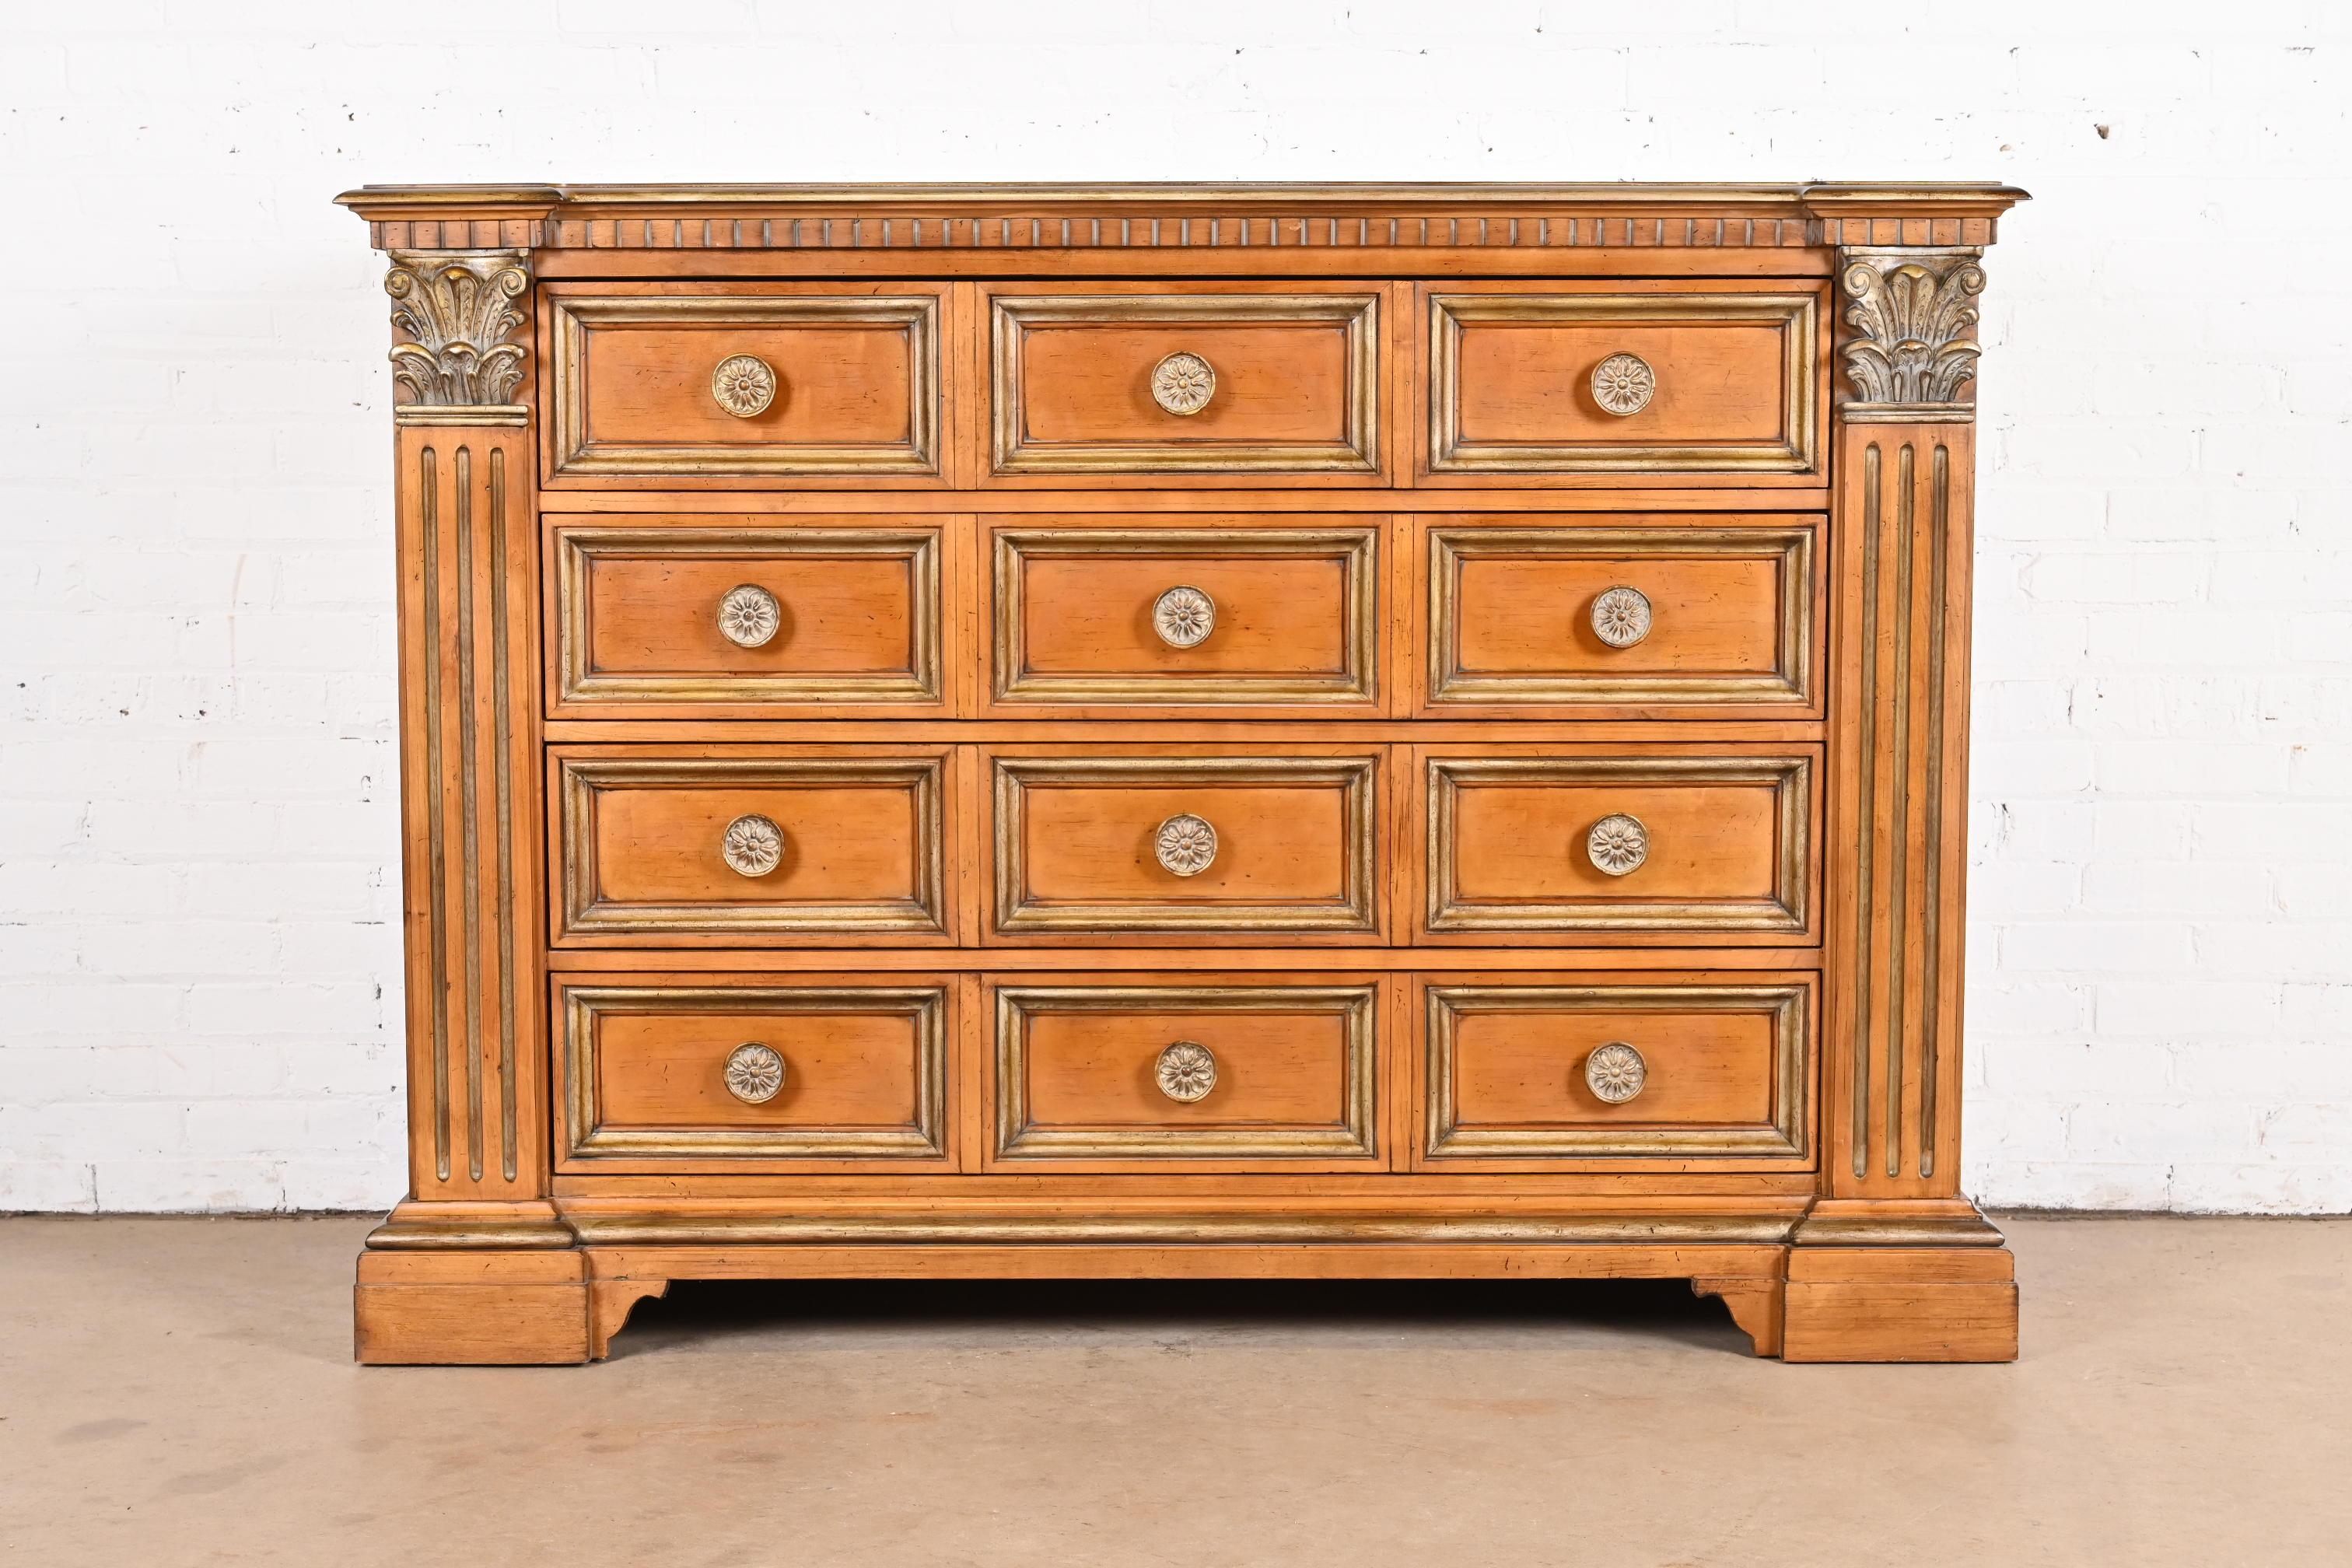 A gorgeous Italian Neoclassical or Empire style four-drawer dresser or chest of drawers

By Century Furniture

USA, Late 20th Century

Beautiful carved maple, with parcel-gilt details, and original brass hardware.

Measures: 62.5